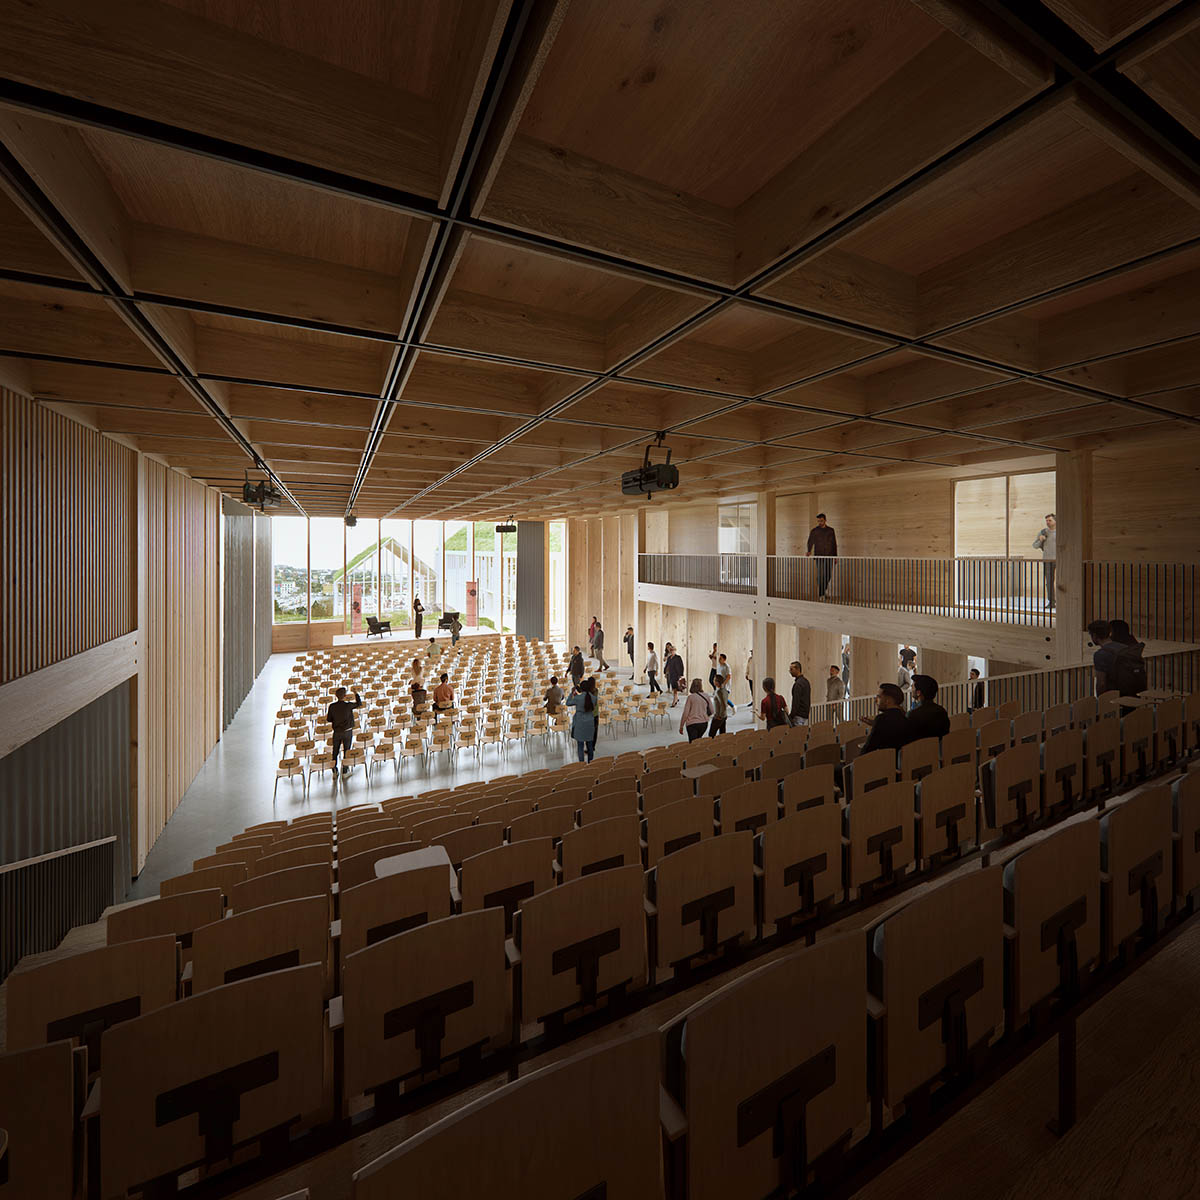 Henning Larsen designs new mass timber and microclimate university building in Faroe Islands 